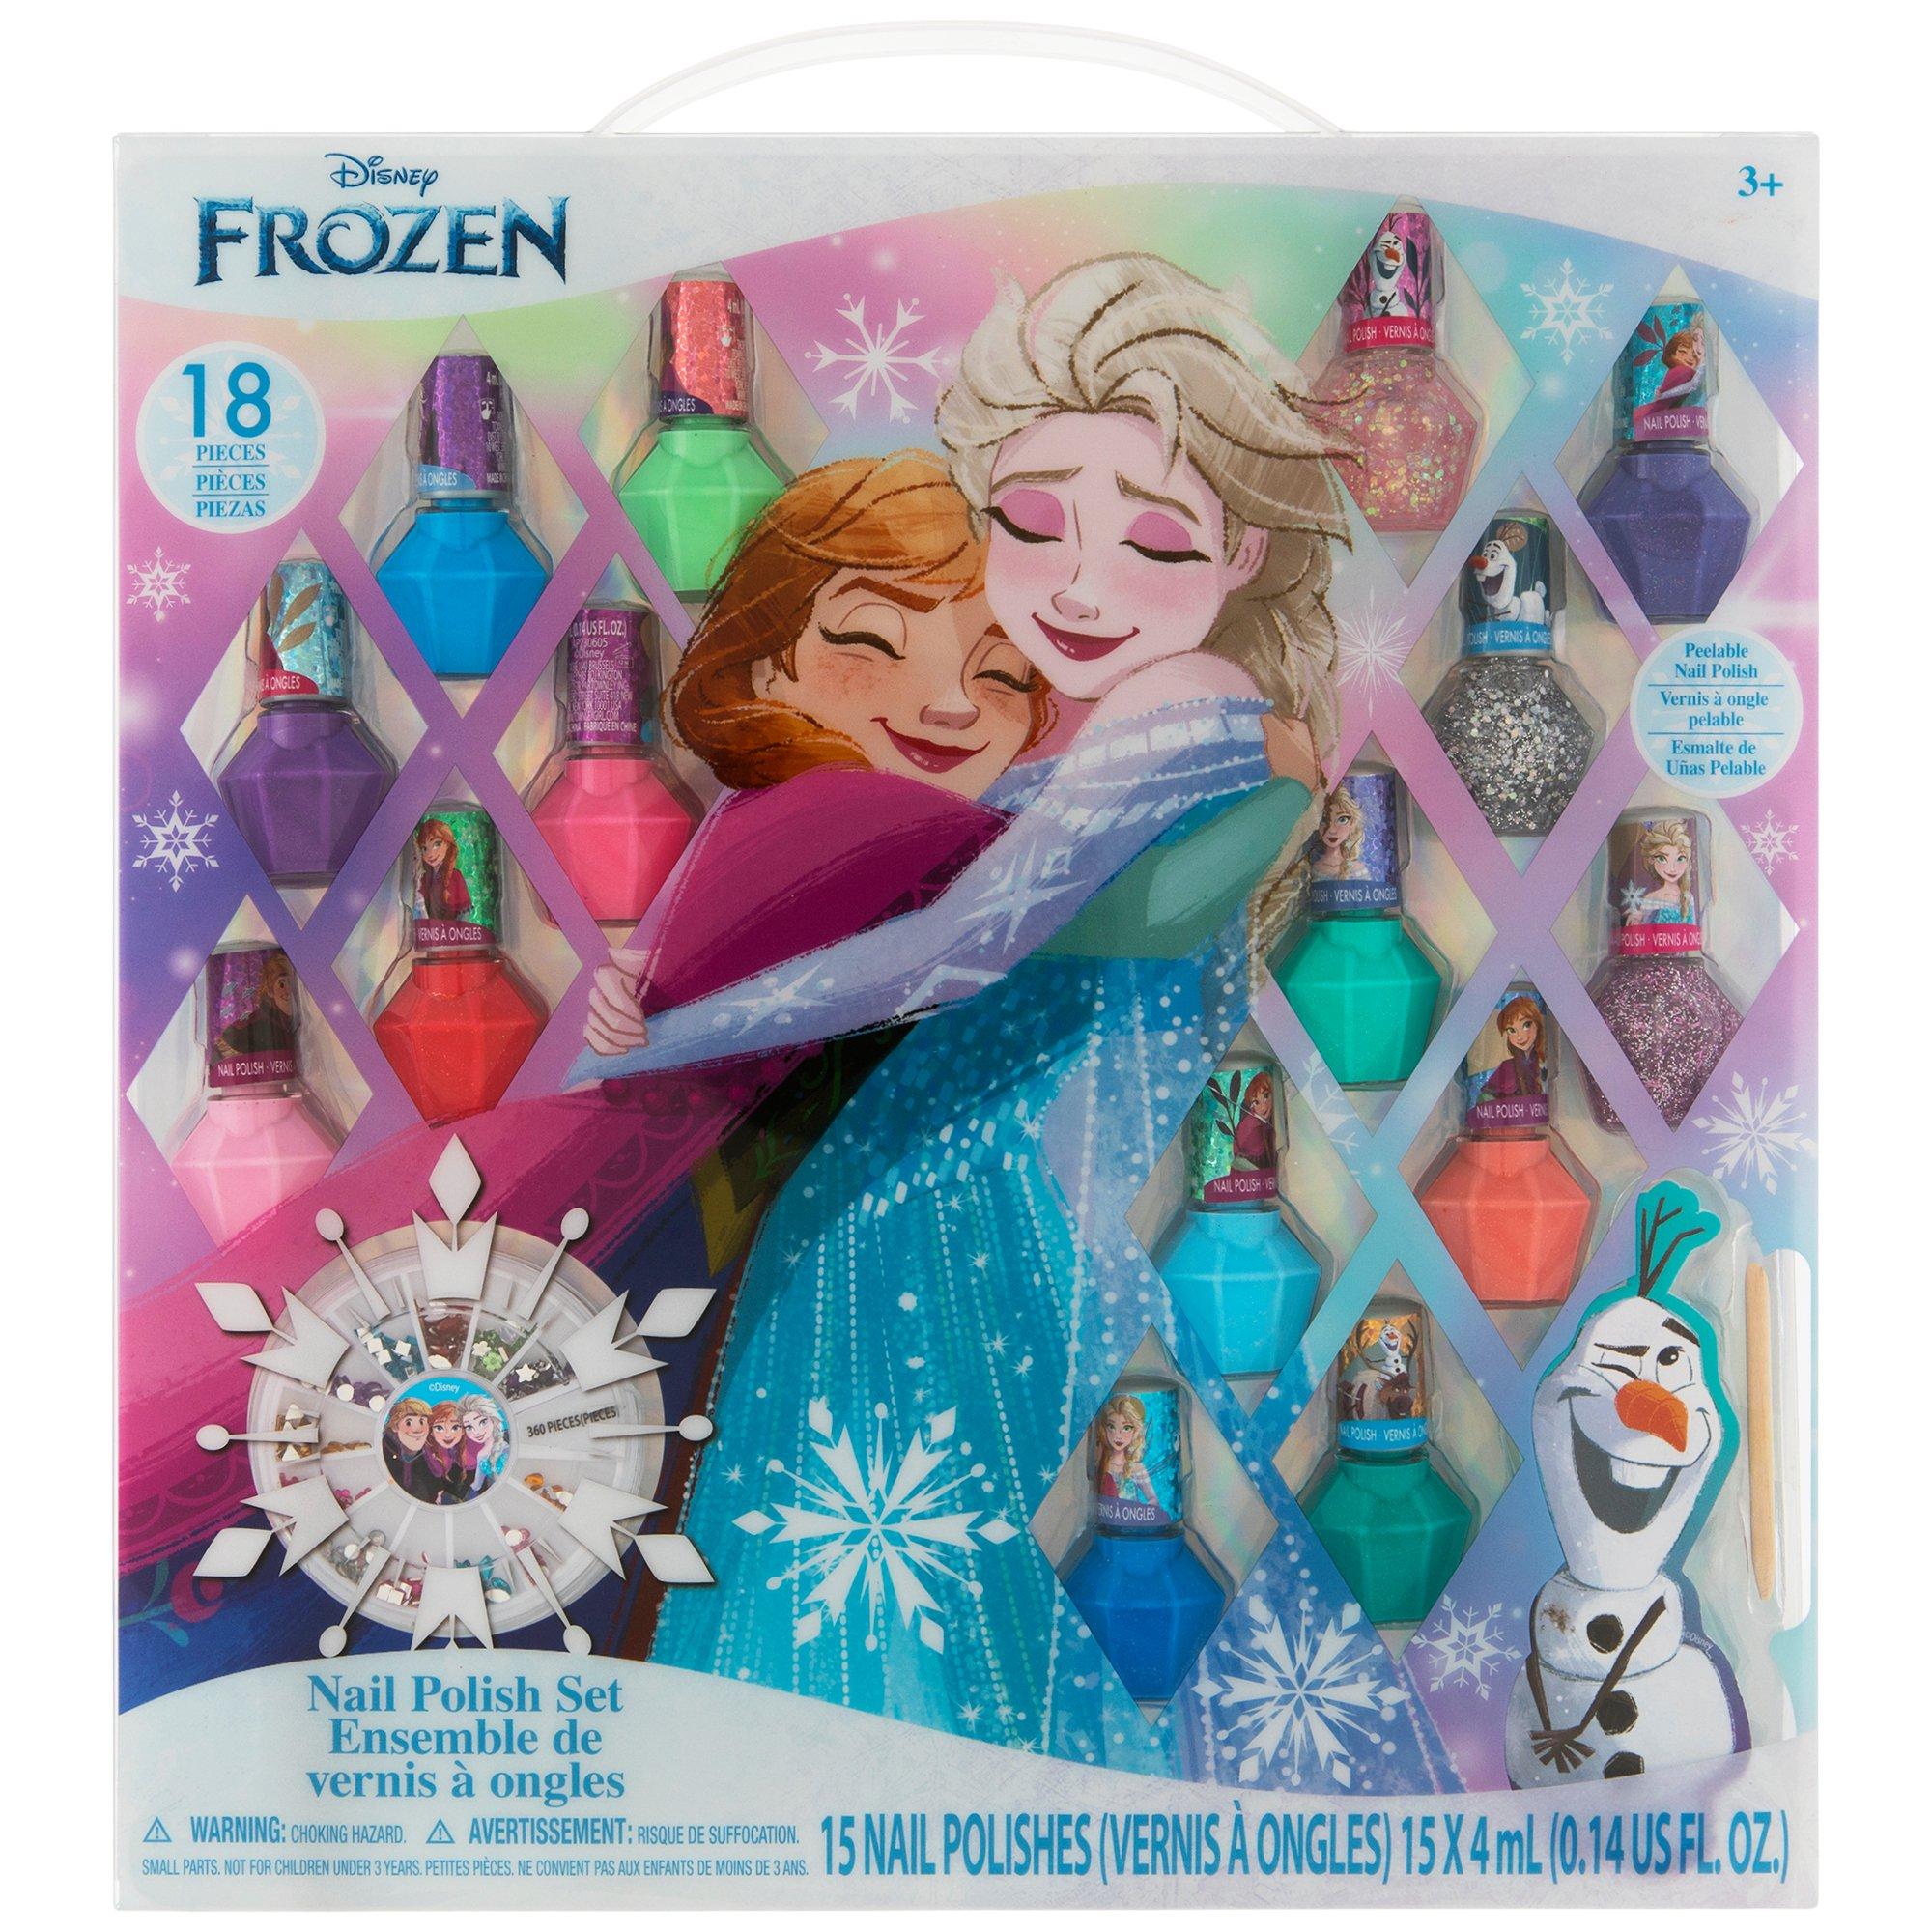 Frozen 2 Activity & Coloring Book, Hobby Lobby